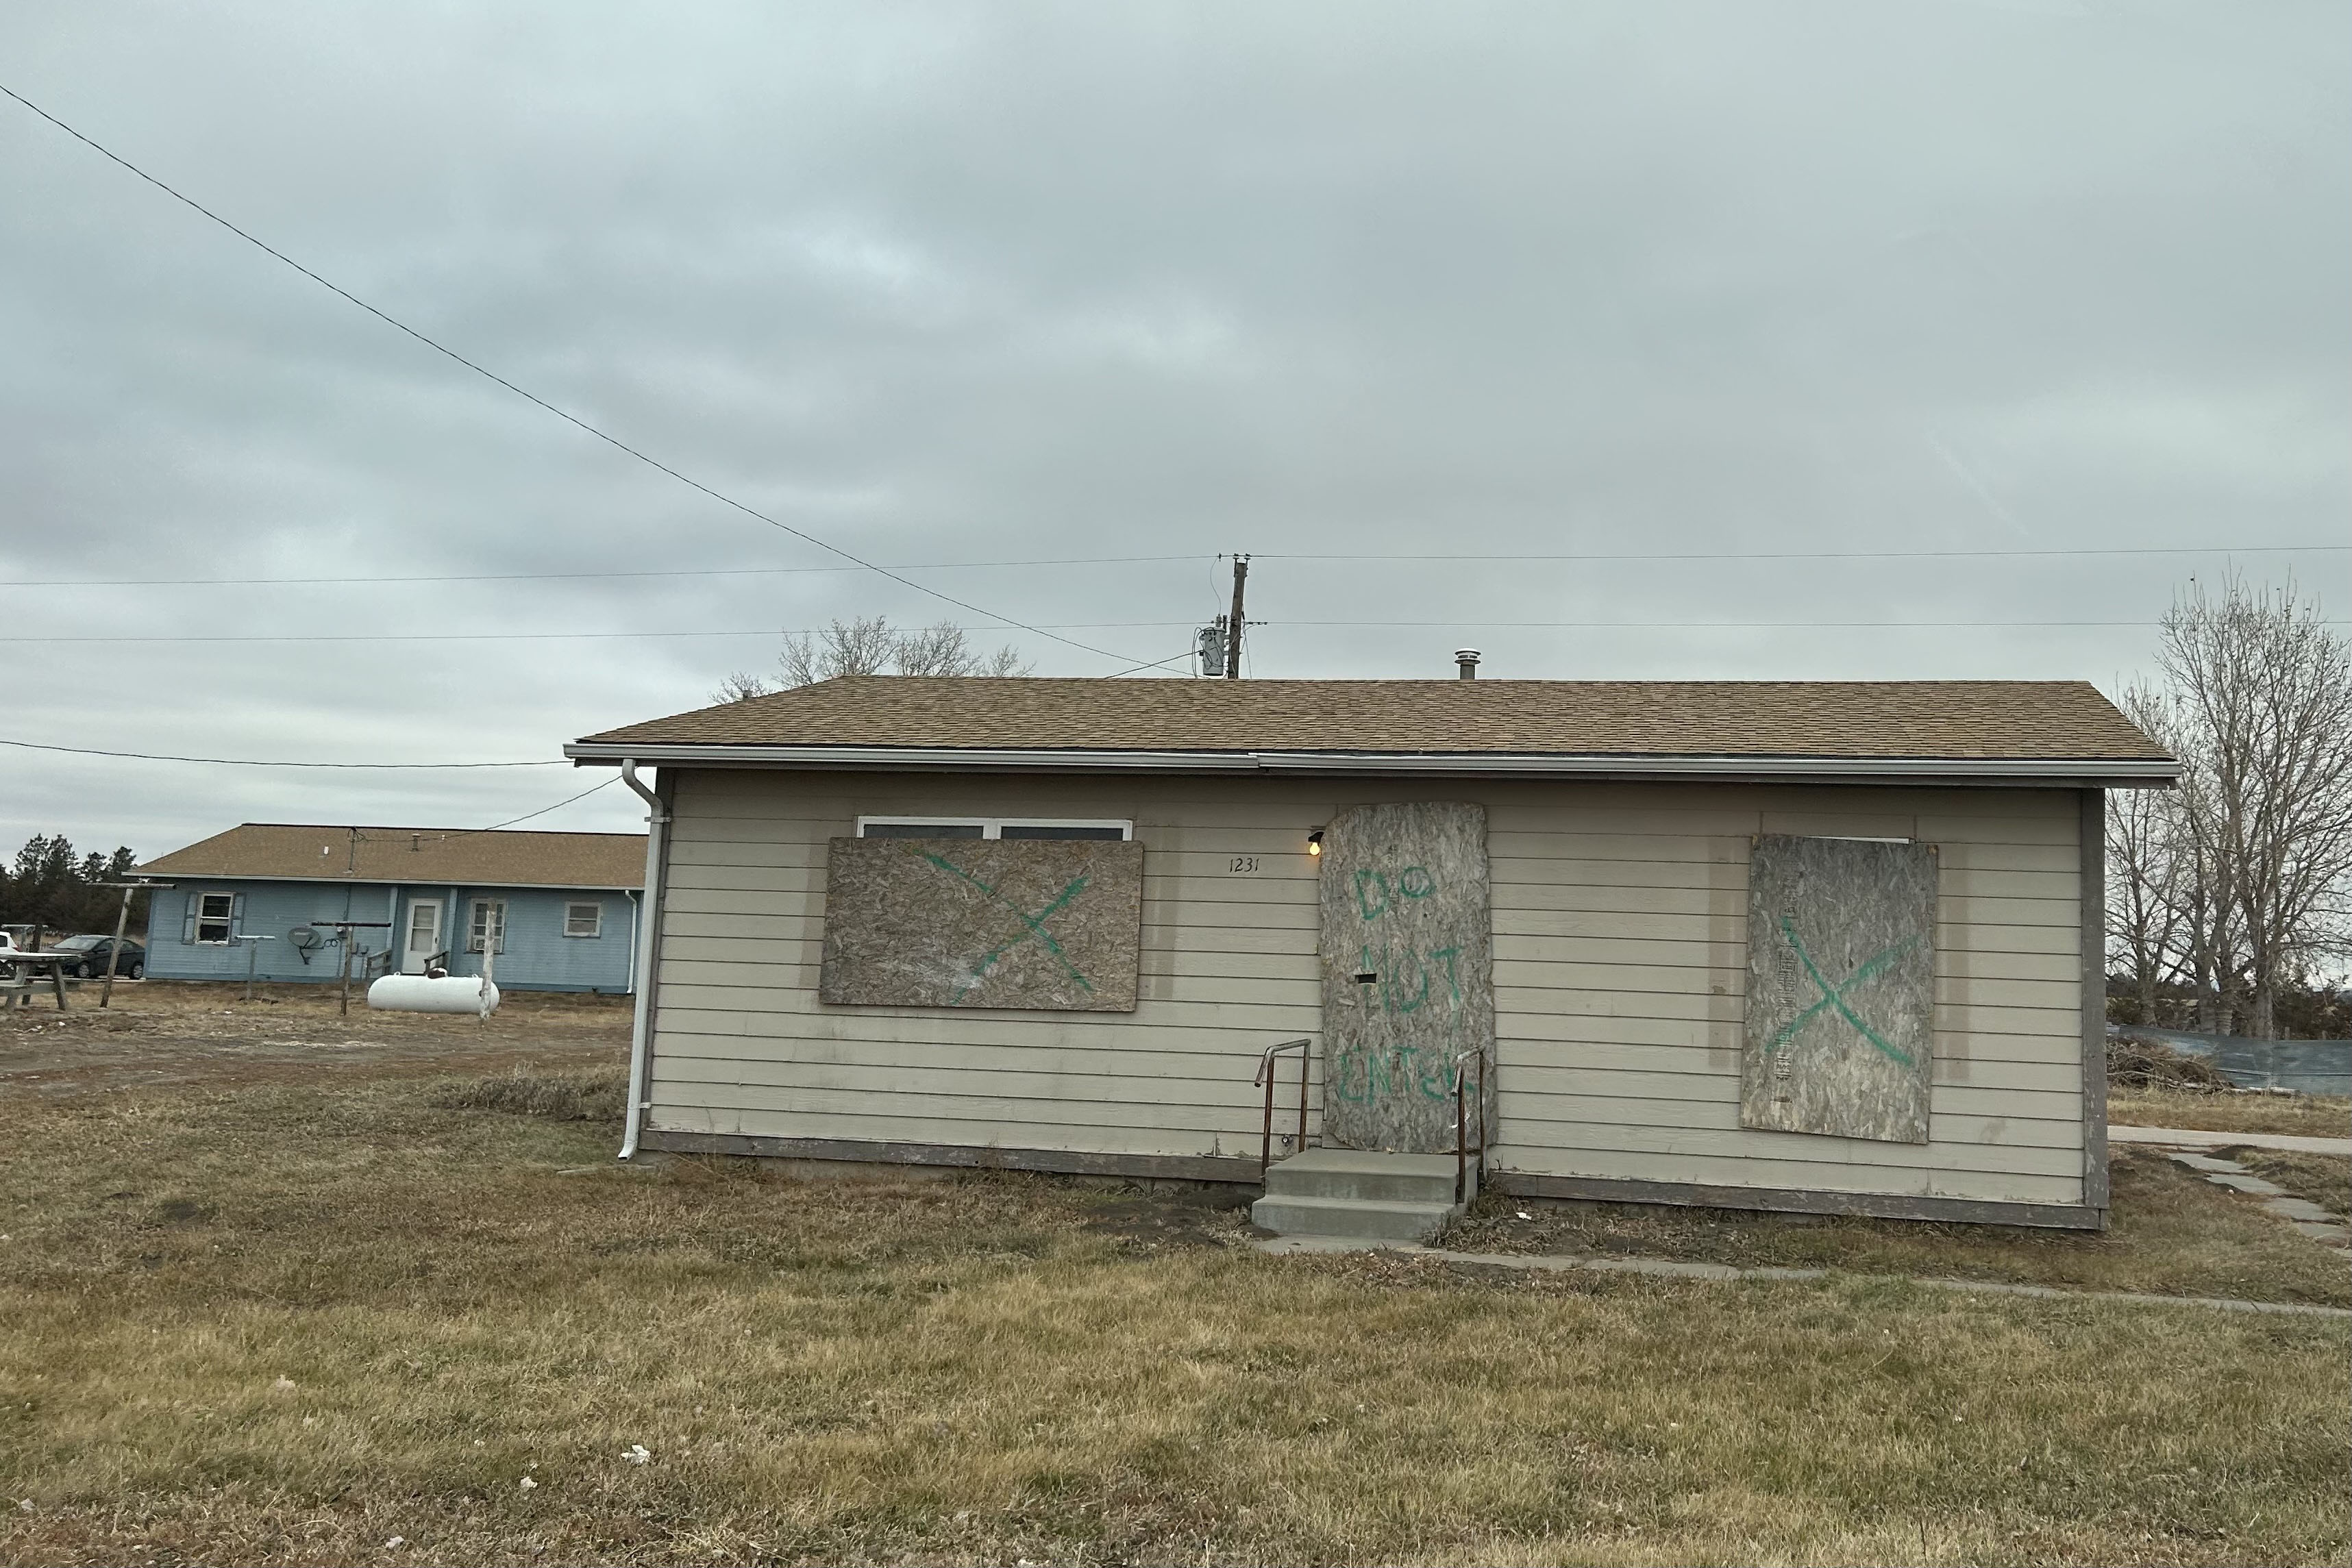 A single-story home in Martin, South Dakota, that has boards over the windows and doors.